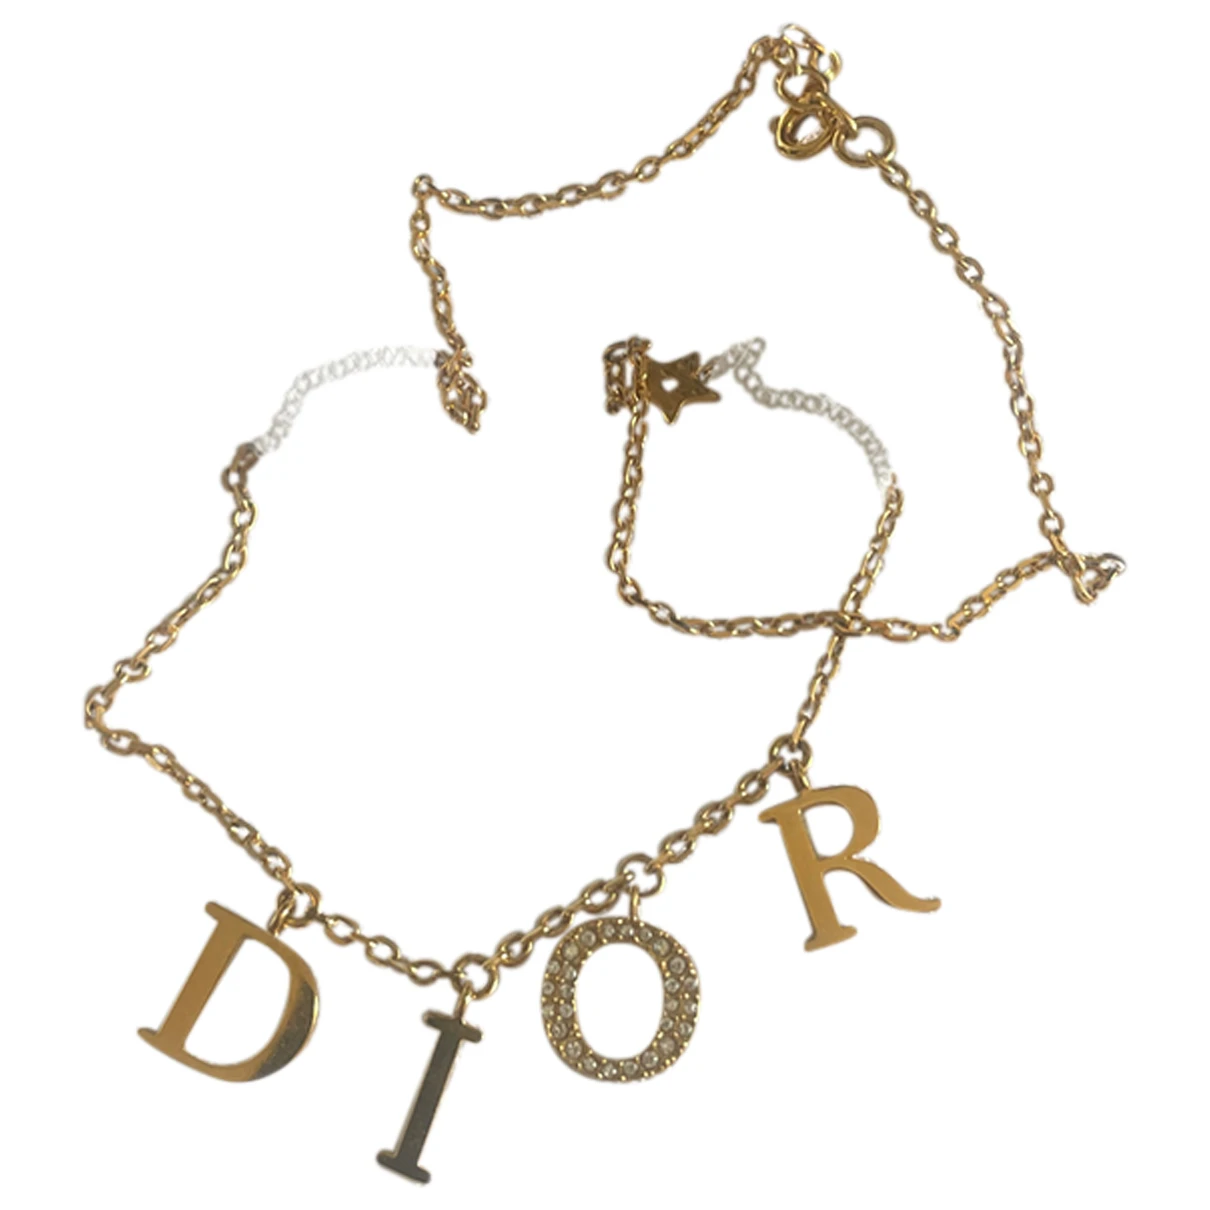 jewellery Dior necklaces Dio(r)evolution for Female Crystal. Used condition